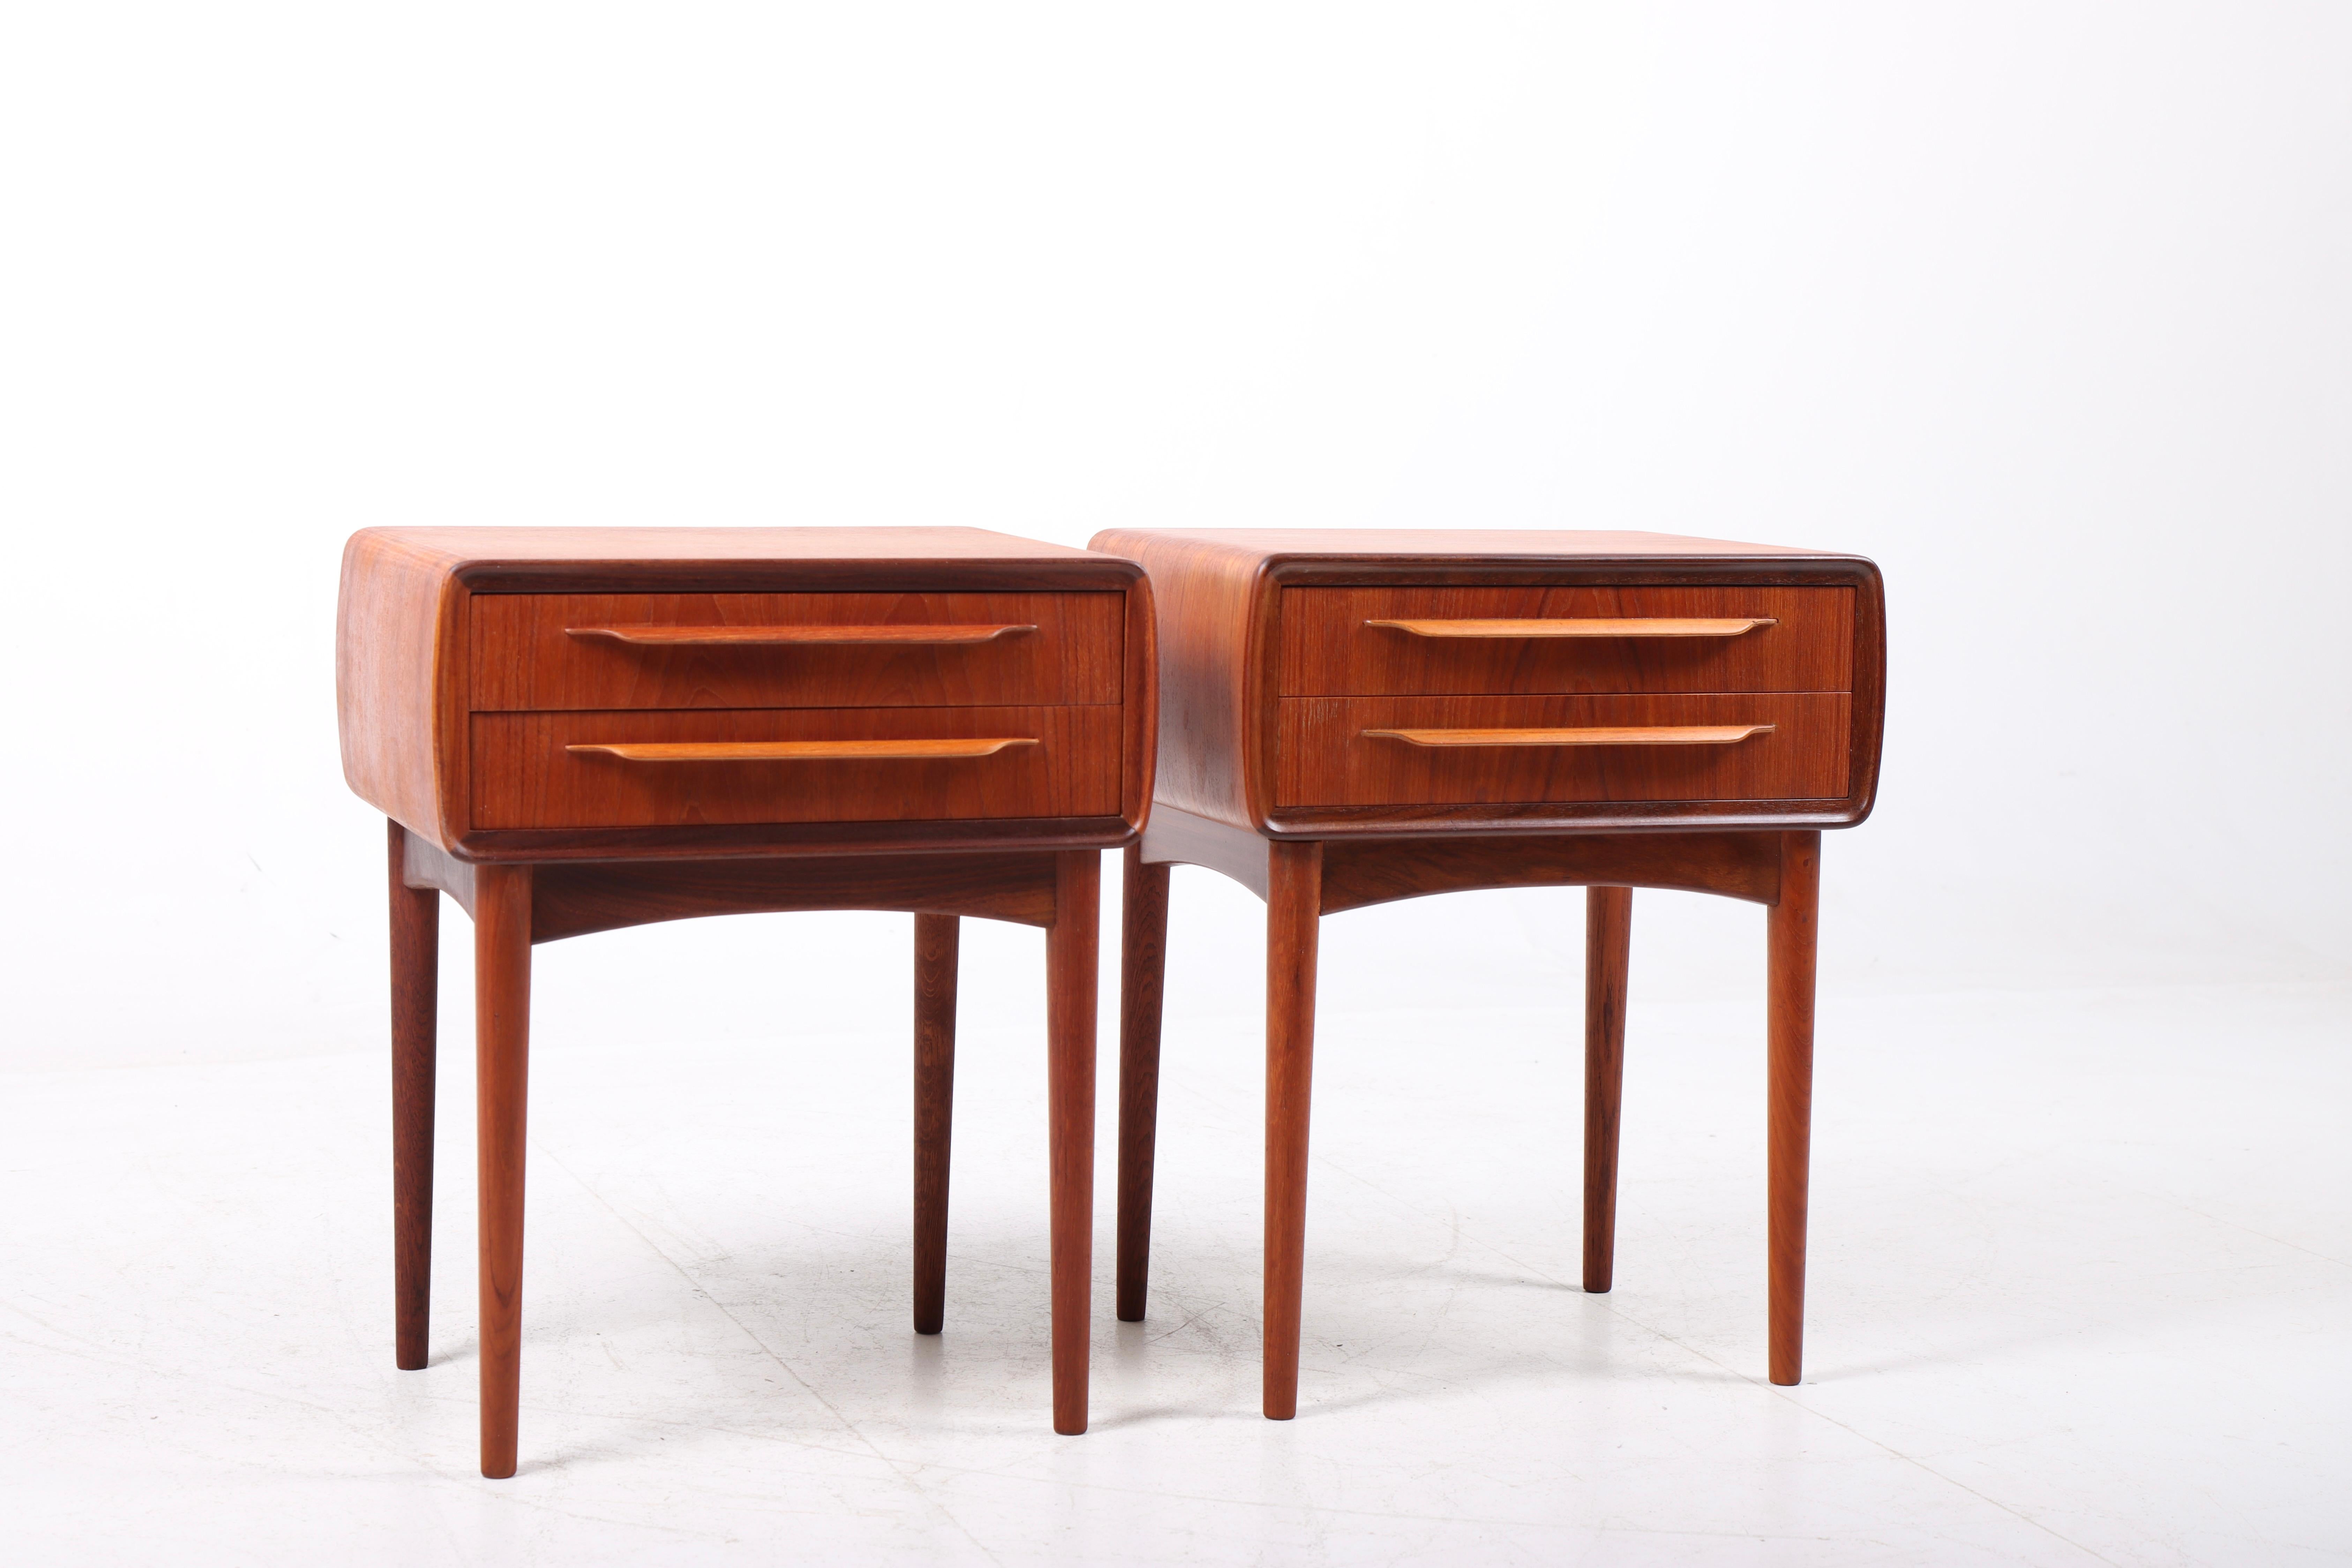 Pair of nightstands in teak, designed by Maa. Johannes Andersen and made by CFC furniture, Denmark in the 1960s. Great original condition.